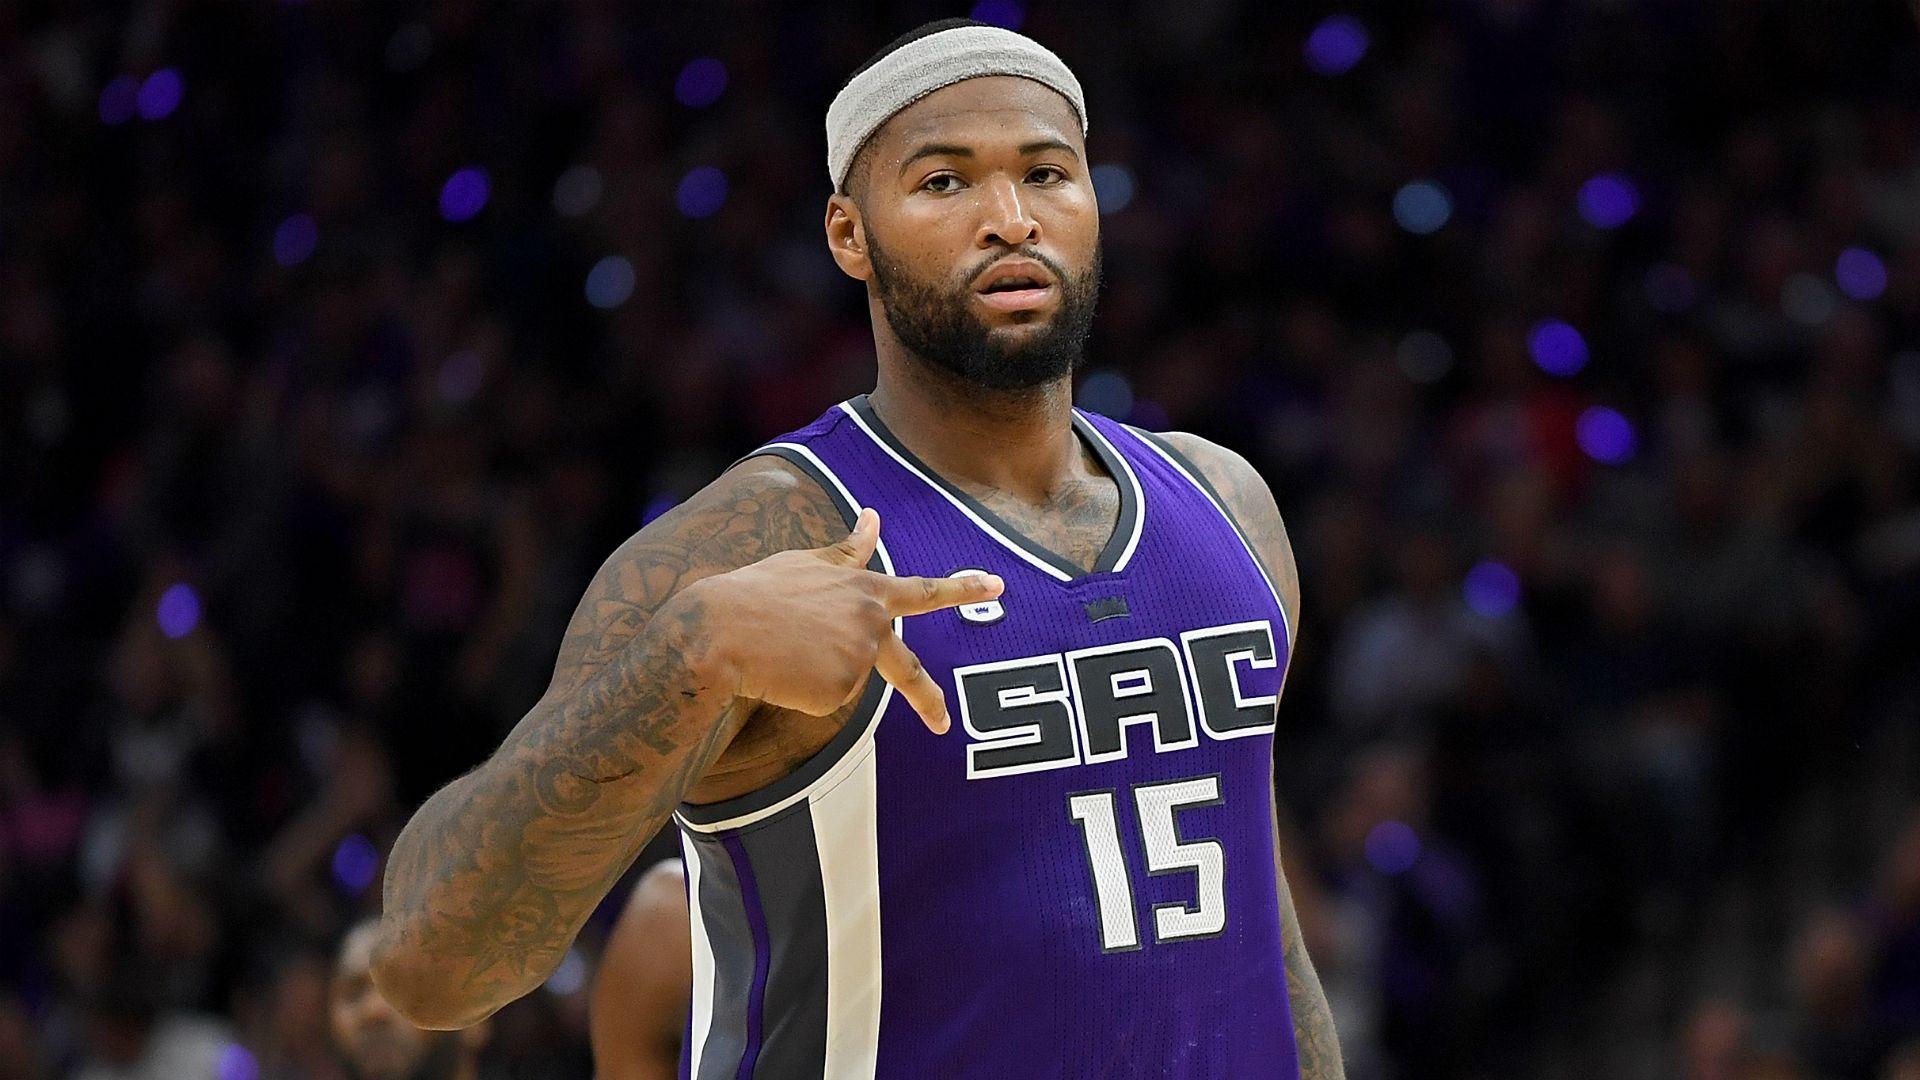 DeMarcus Cousins trade rumors finally feel real and imminent, NBA